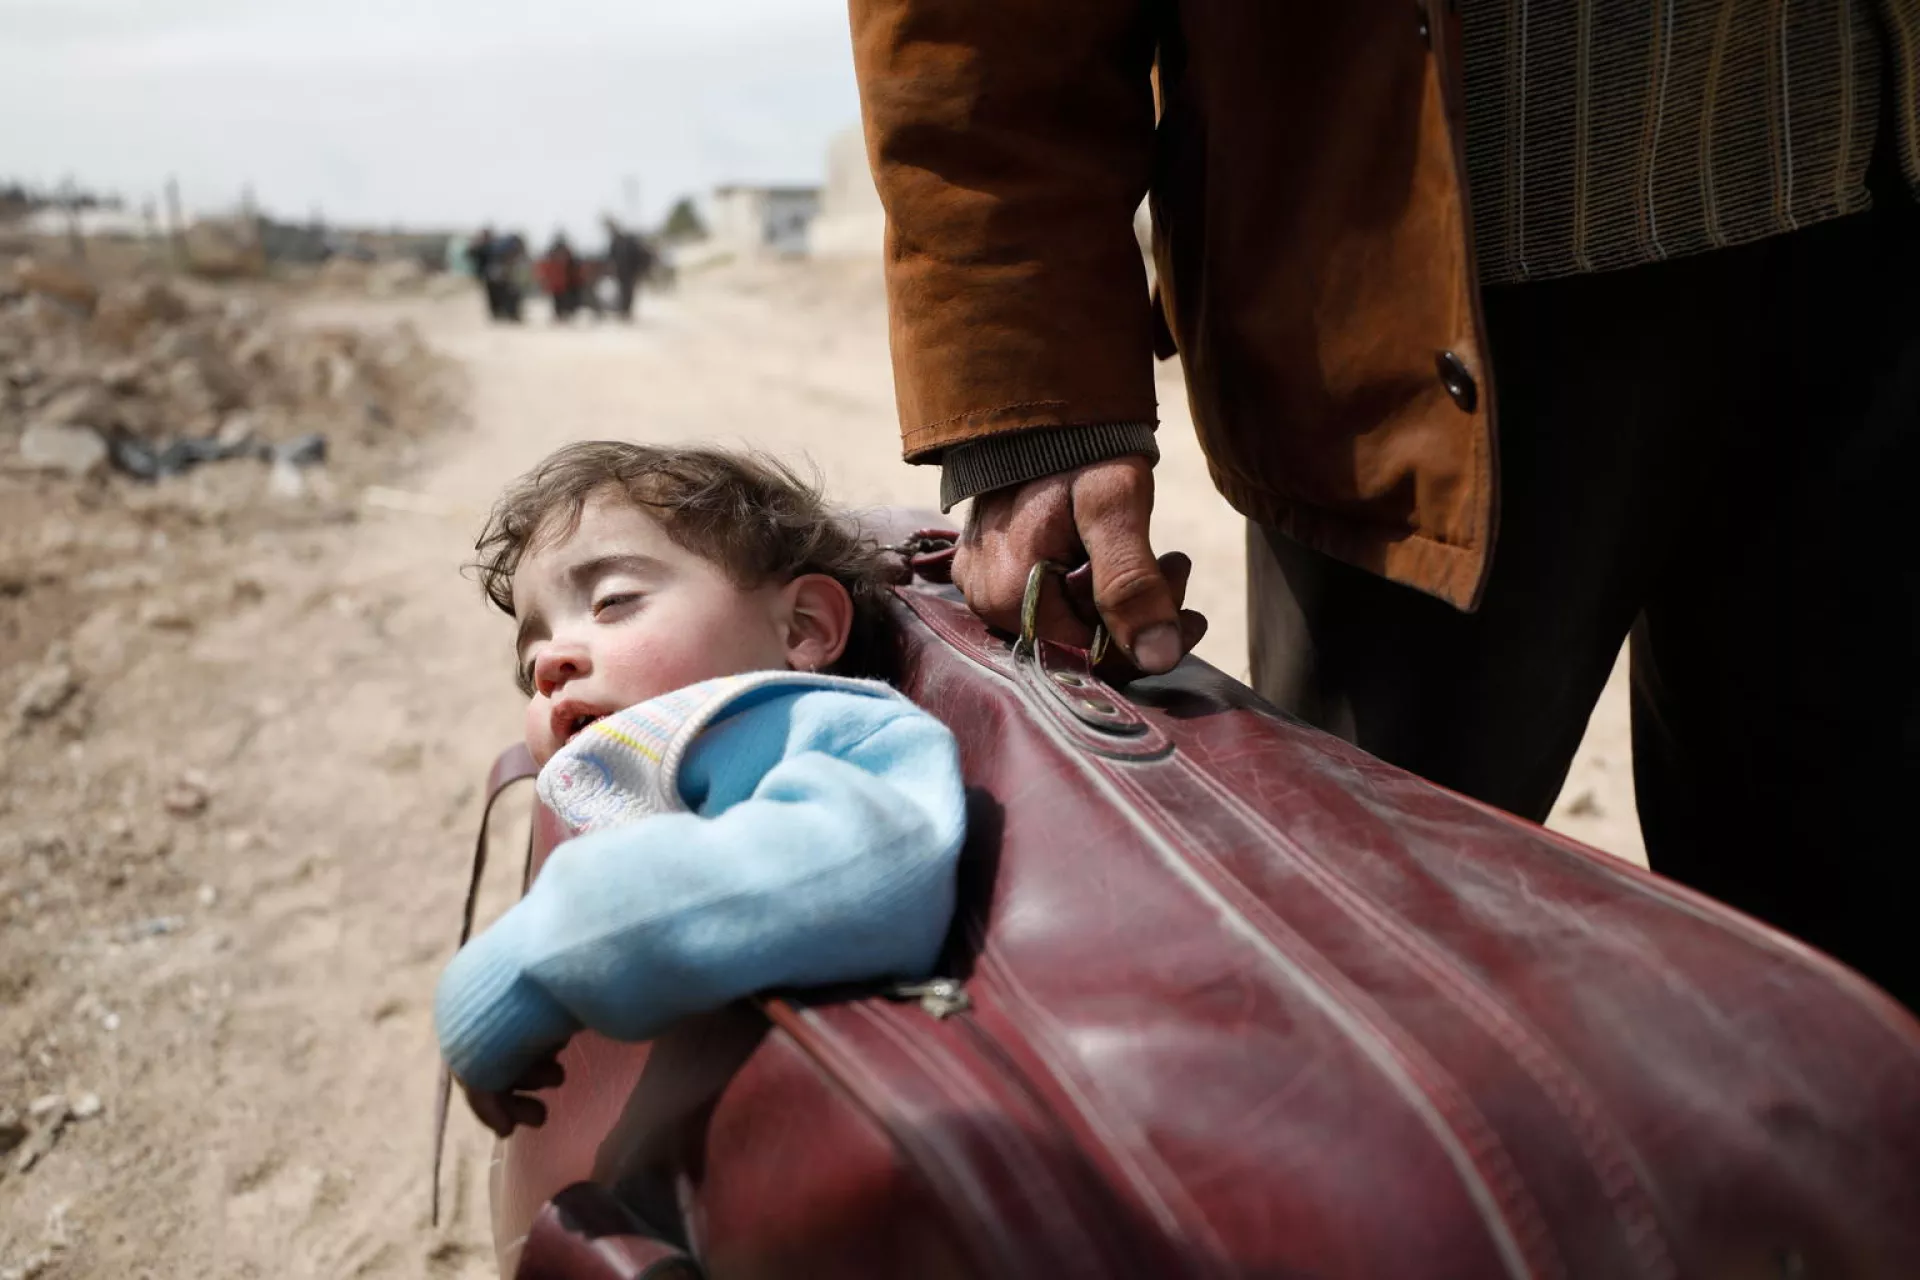 A child is carried in a suitcase, Syrian Arab Republic